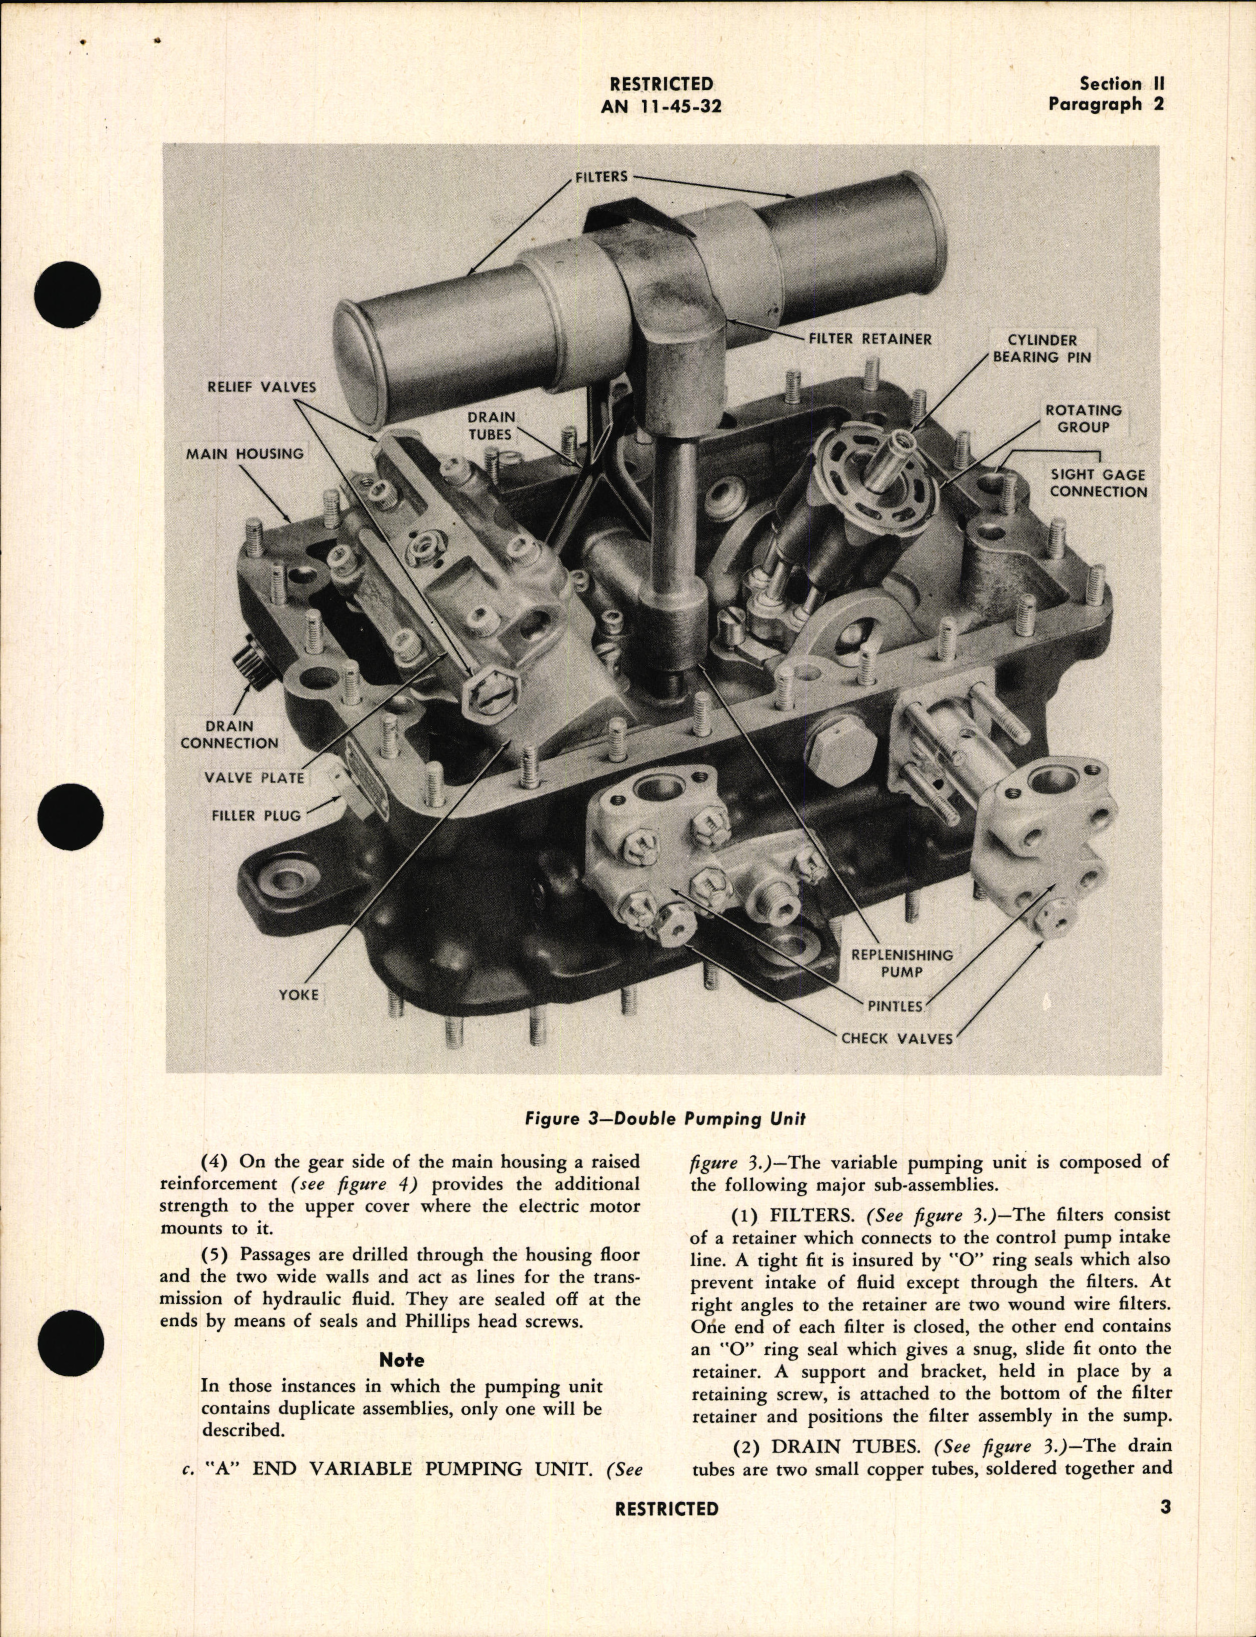 Sample page 7 from AirCorps Library document: Handbook of Instructions with Parts Catalog for Turret Power Unit Model AA-16850